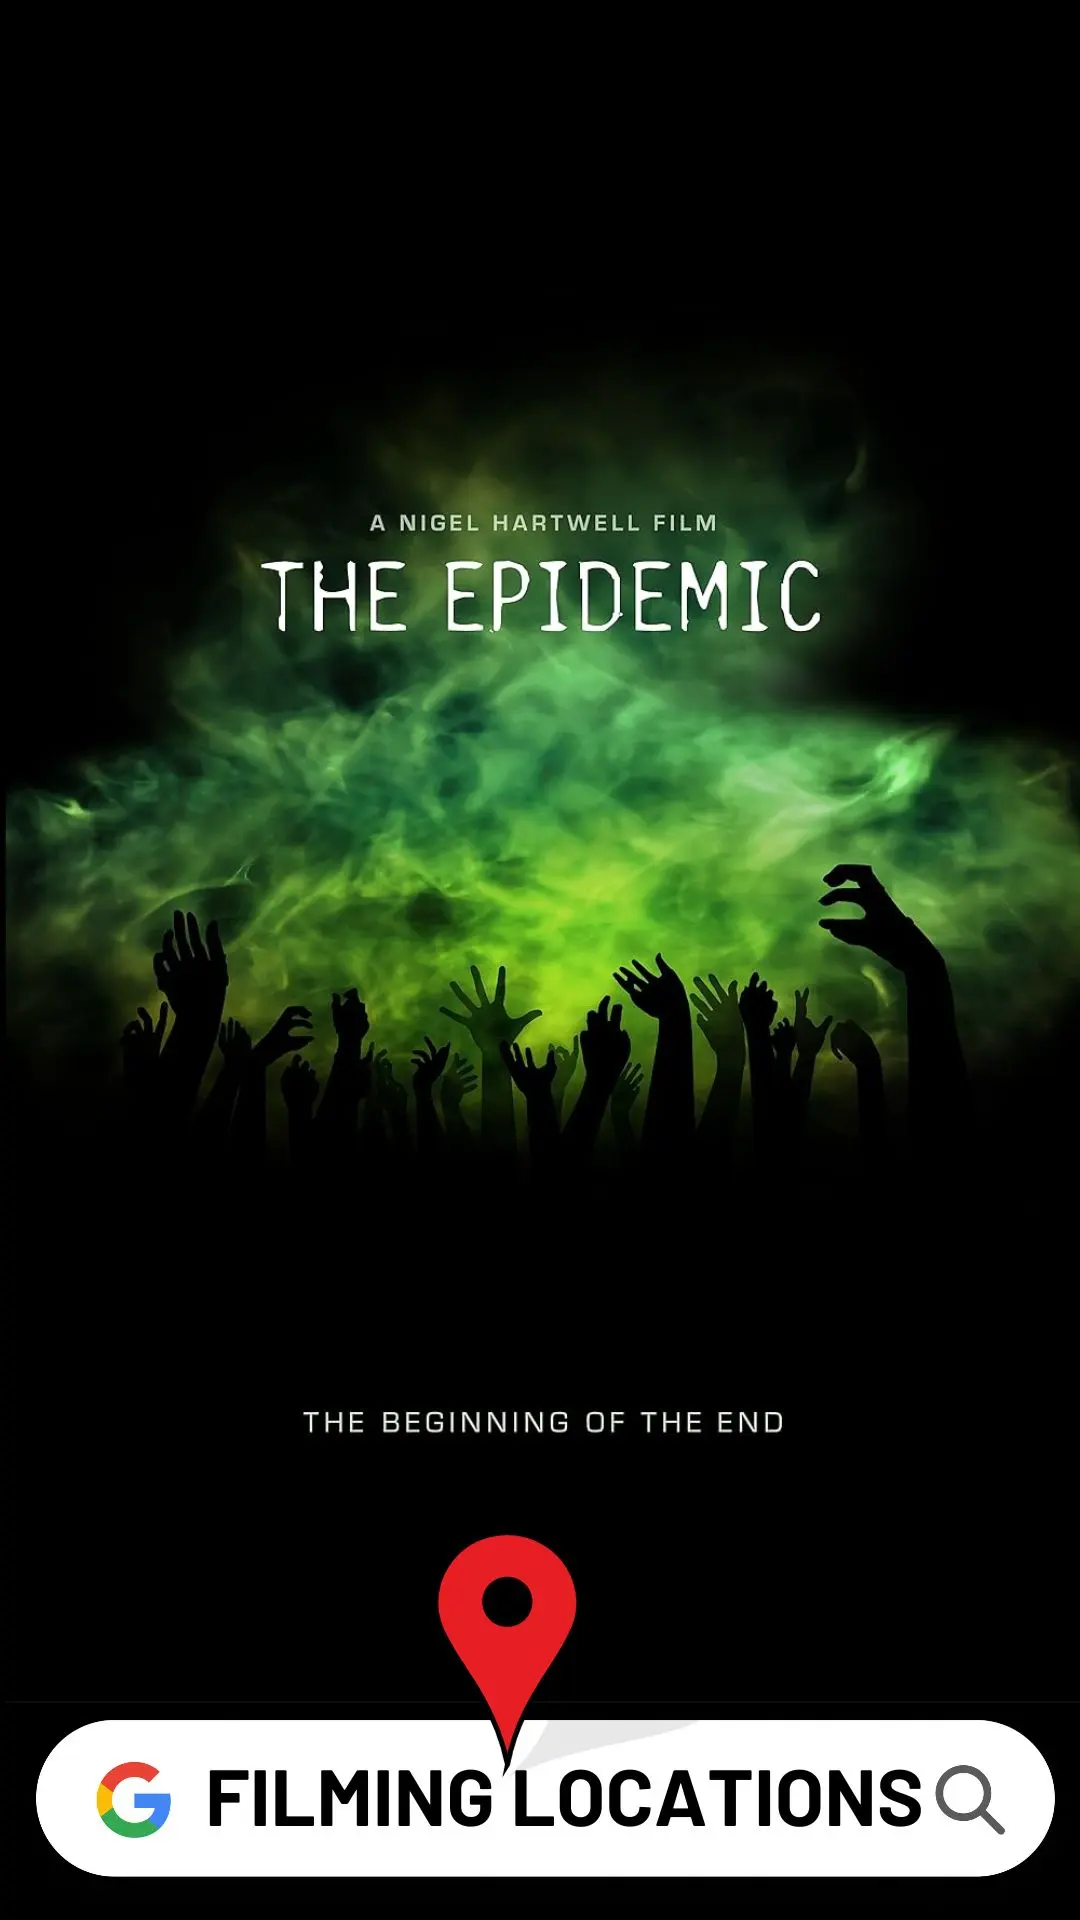 The Epidemic Filming Locations